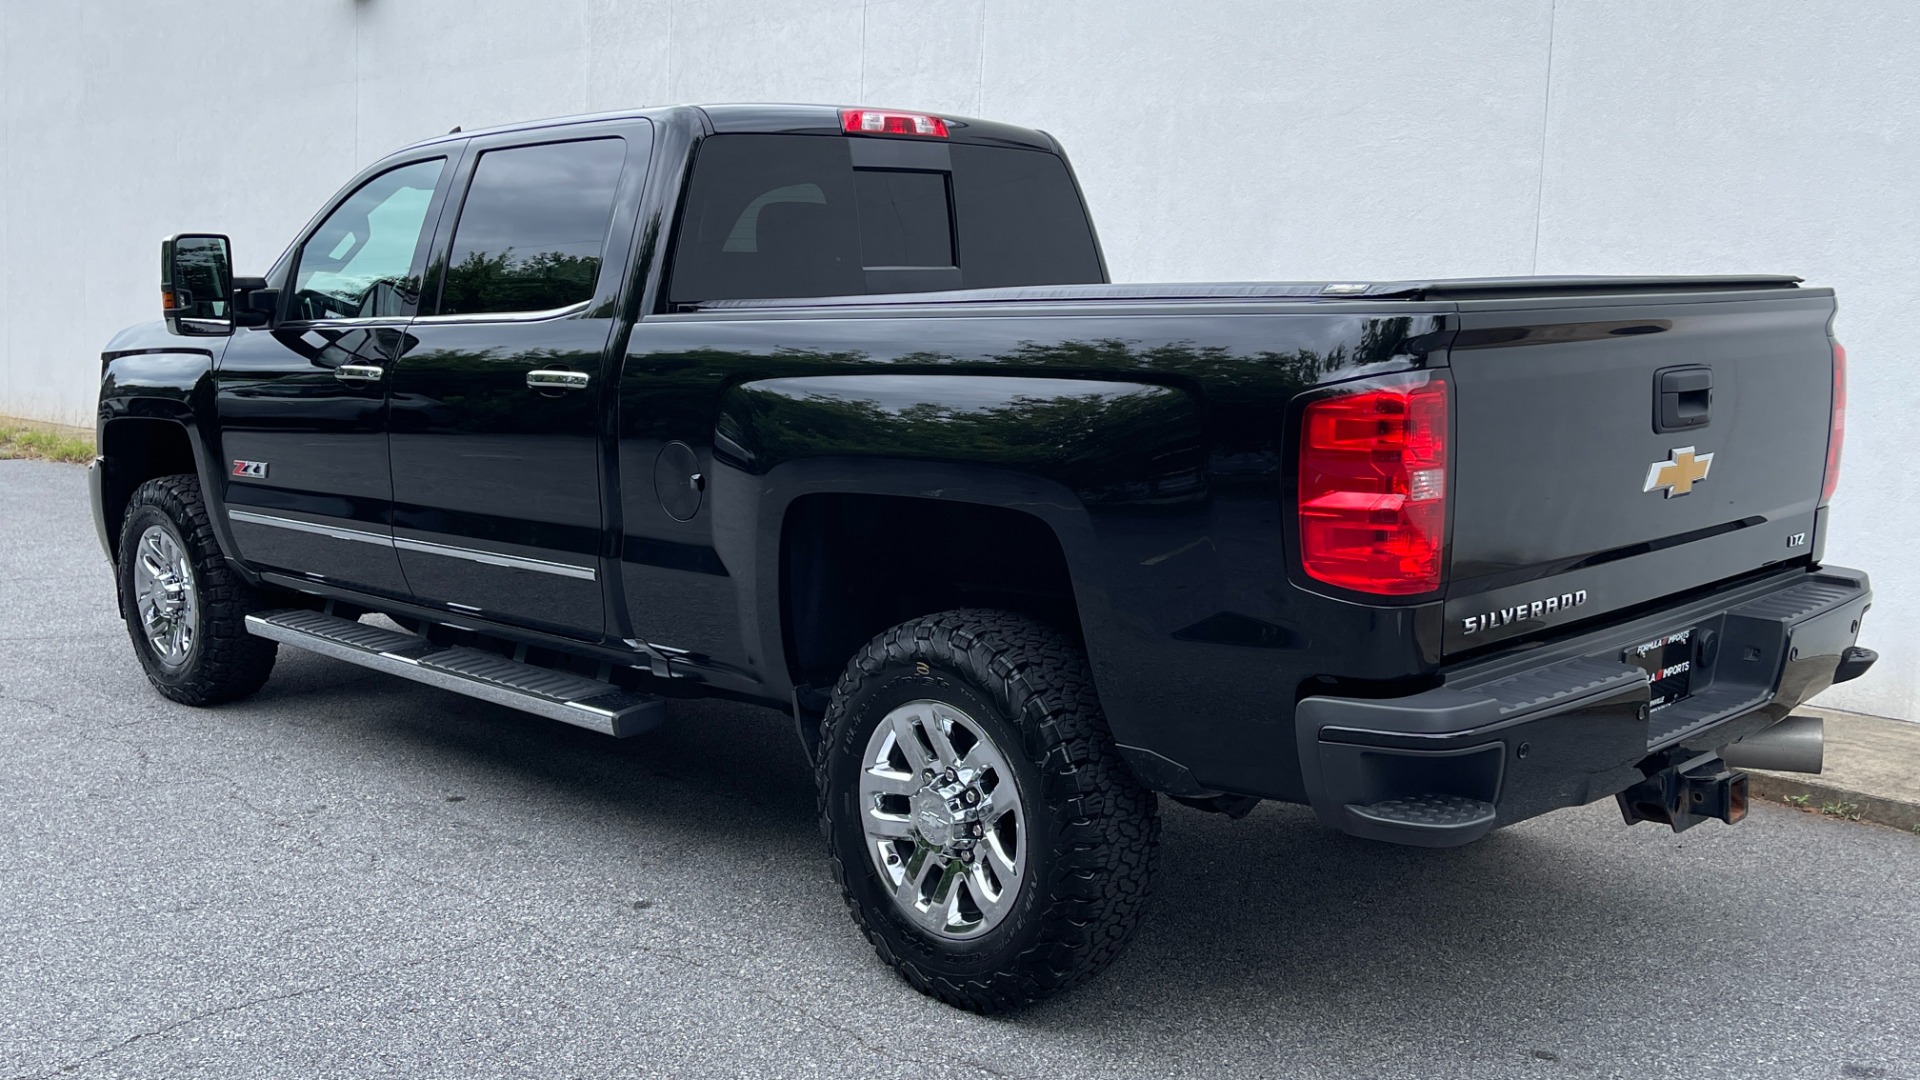 Used 2018 Chevrolet Silverado 3500HD LTZ / DURAMAX PLUS PACKAGE / SPORT EDITION / Z71 OFFROAD / SUNROOF / LEATHE for sale $60,861 at Formula Imports in Charlotte NC 28227 6